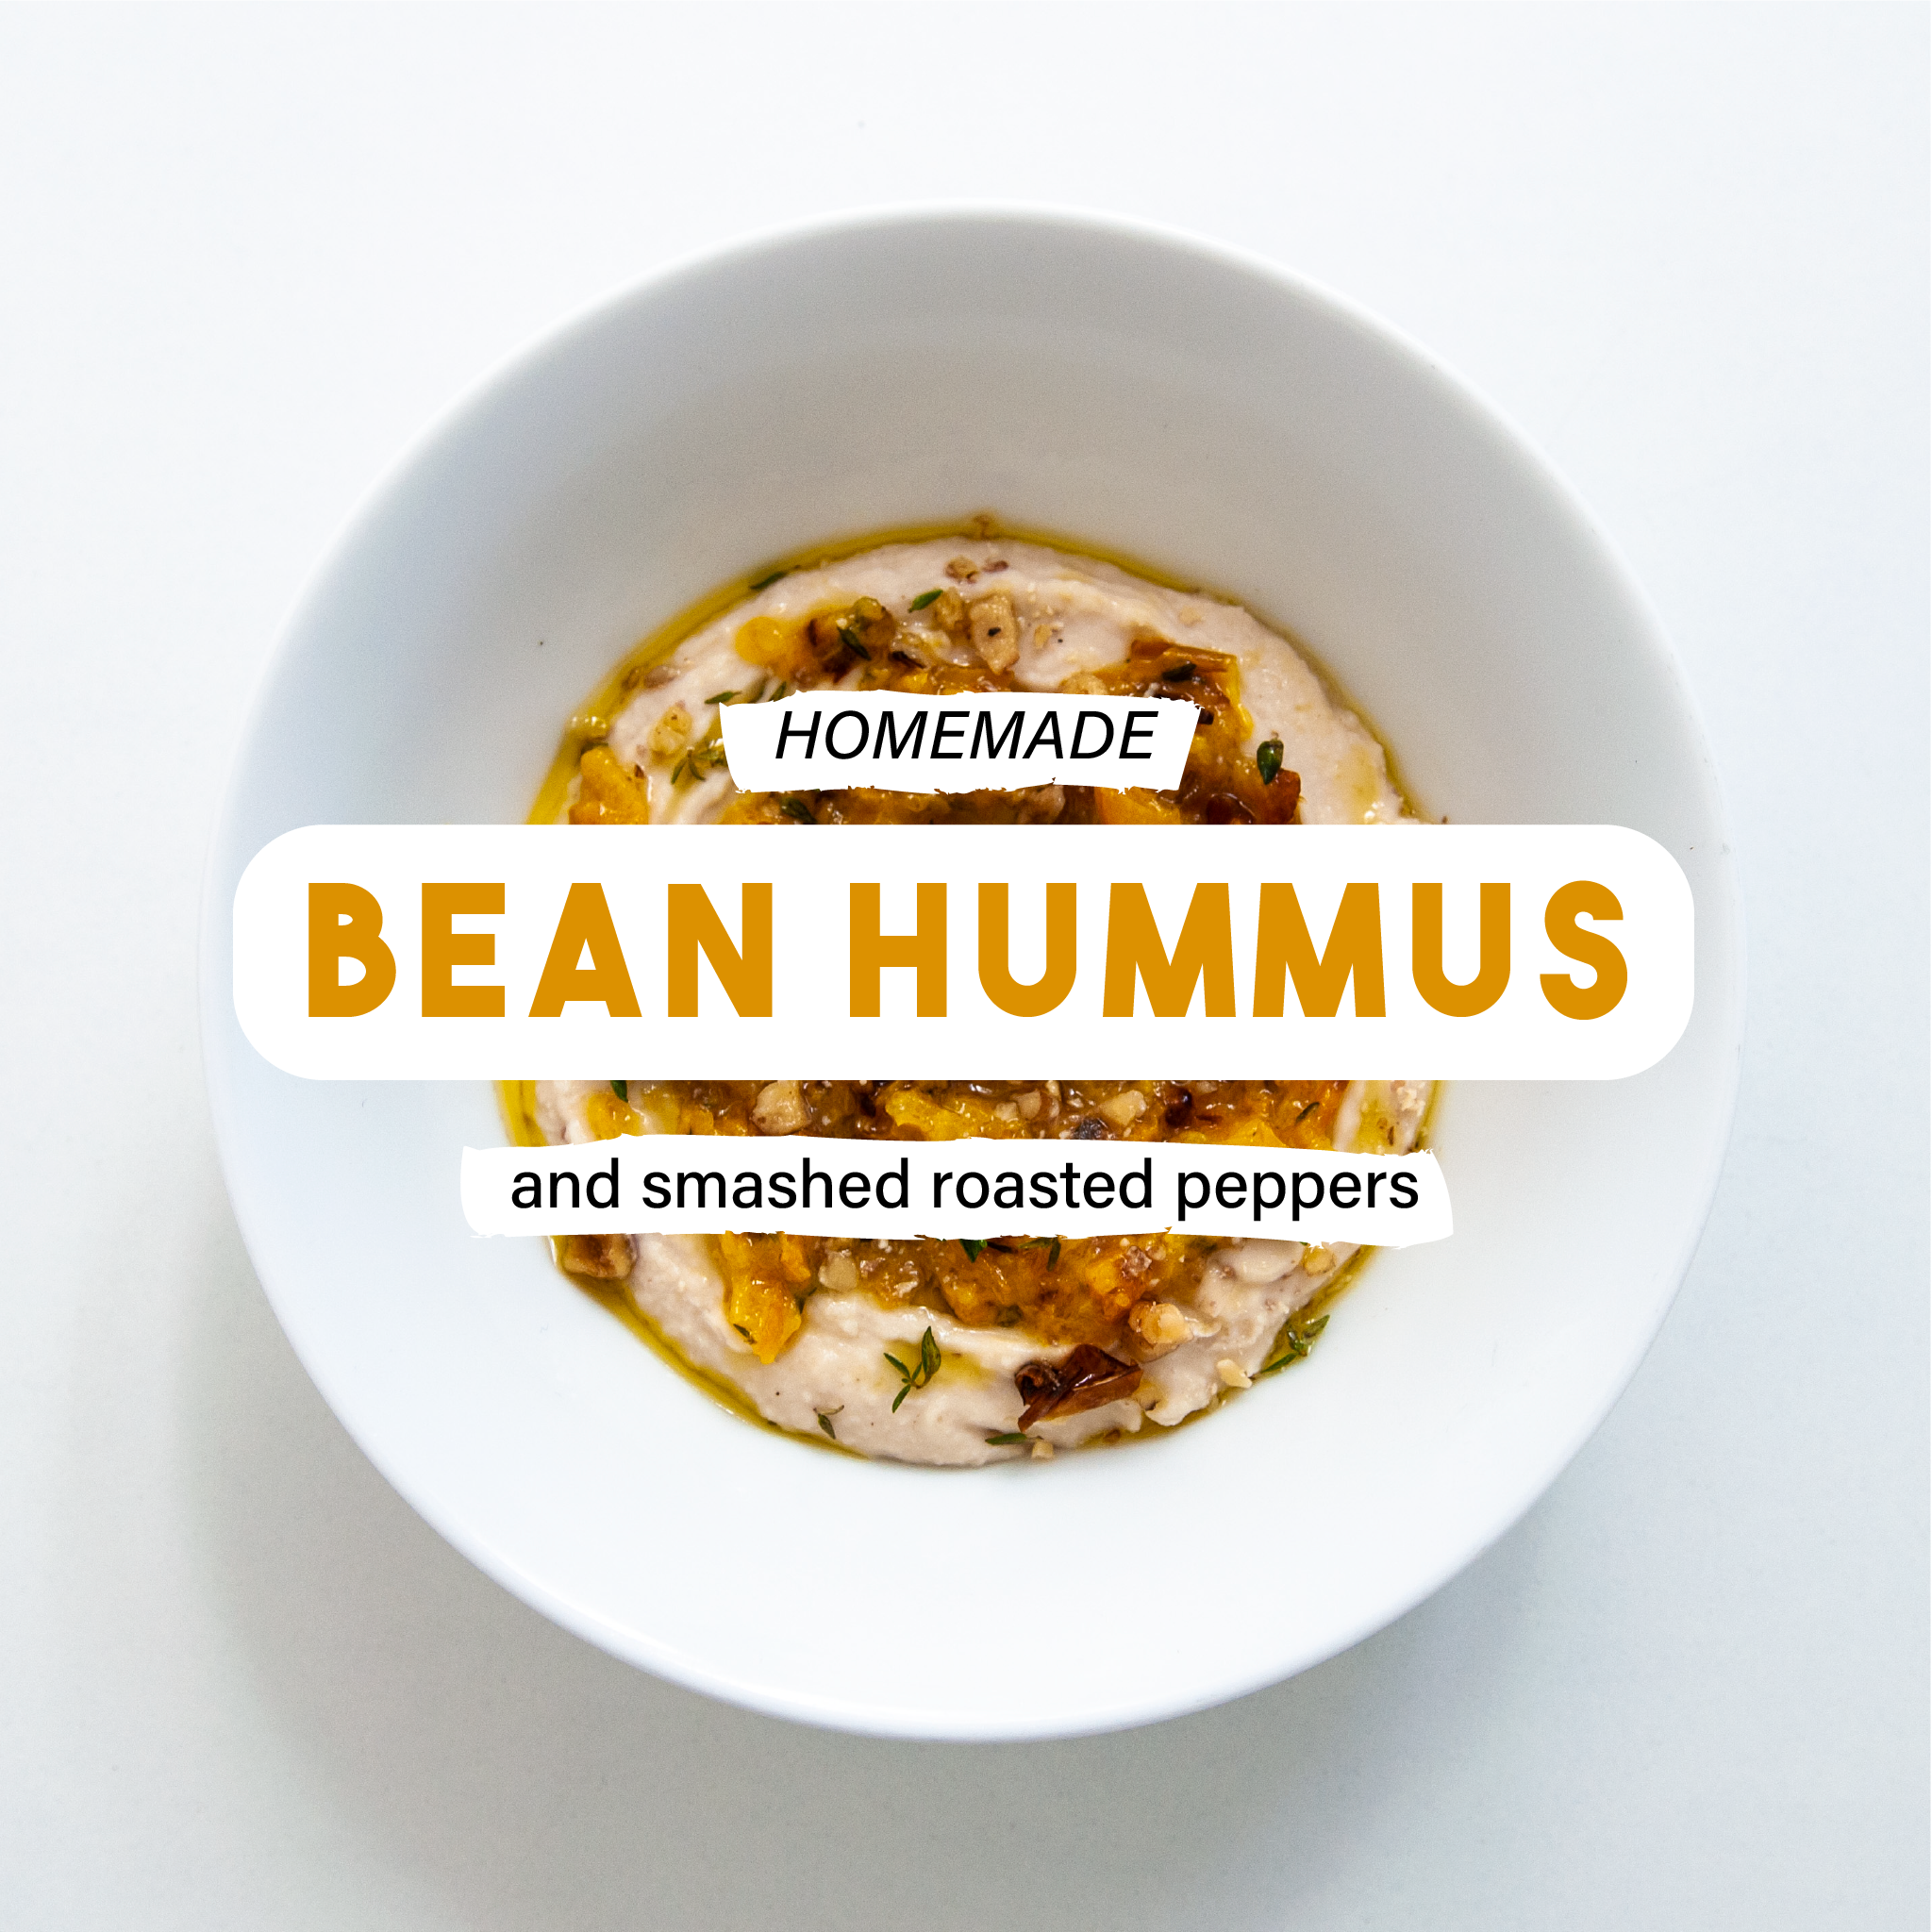 Bean Hummus and smashed roasted peppers